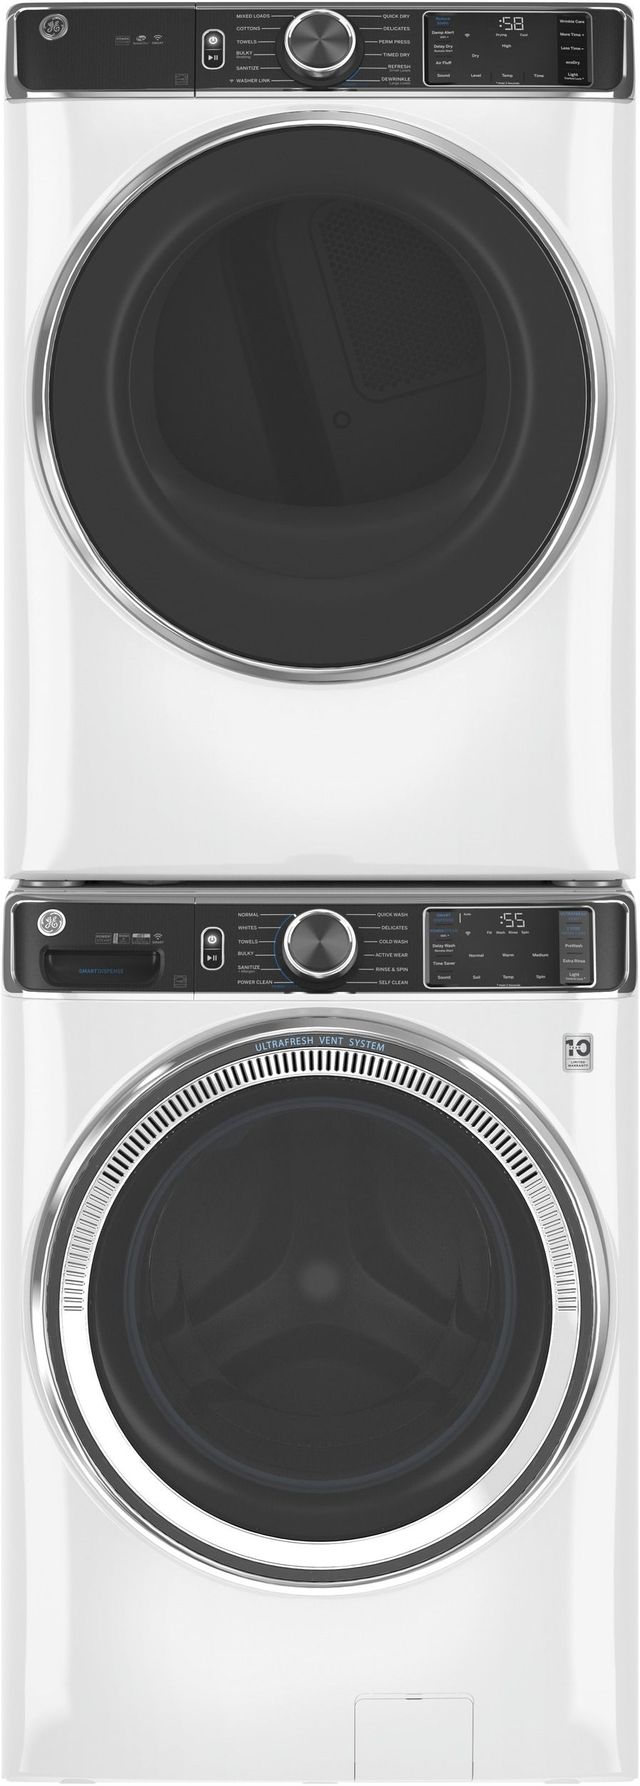 GE 850 Series White Front Load Washer & Electric Dryer Package w/ Pedestals-1